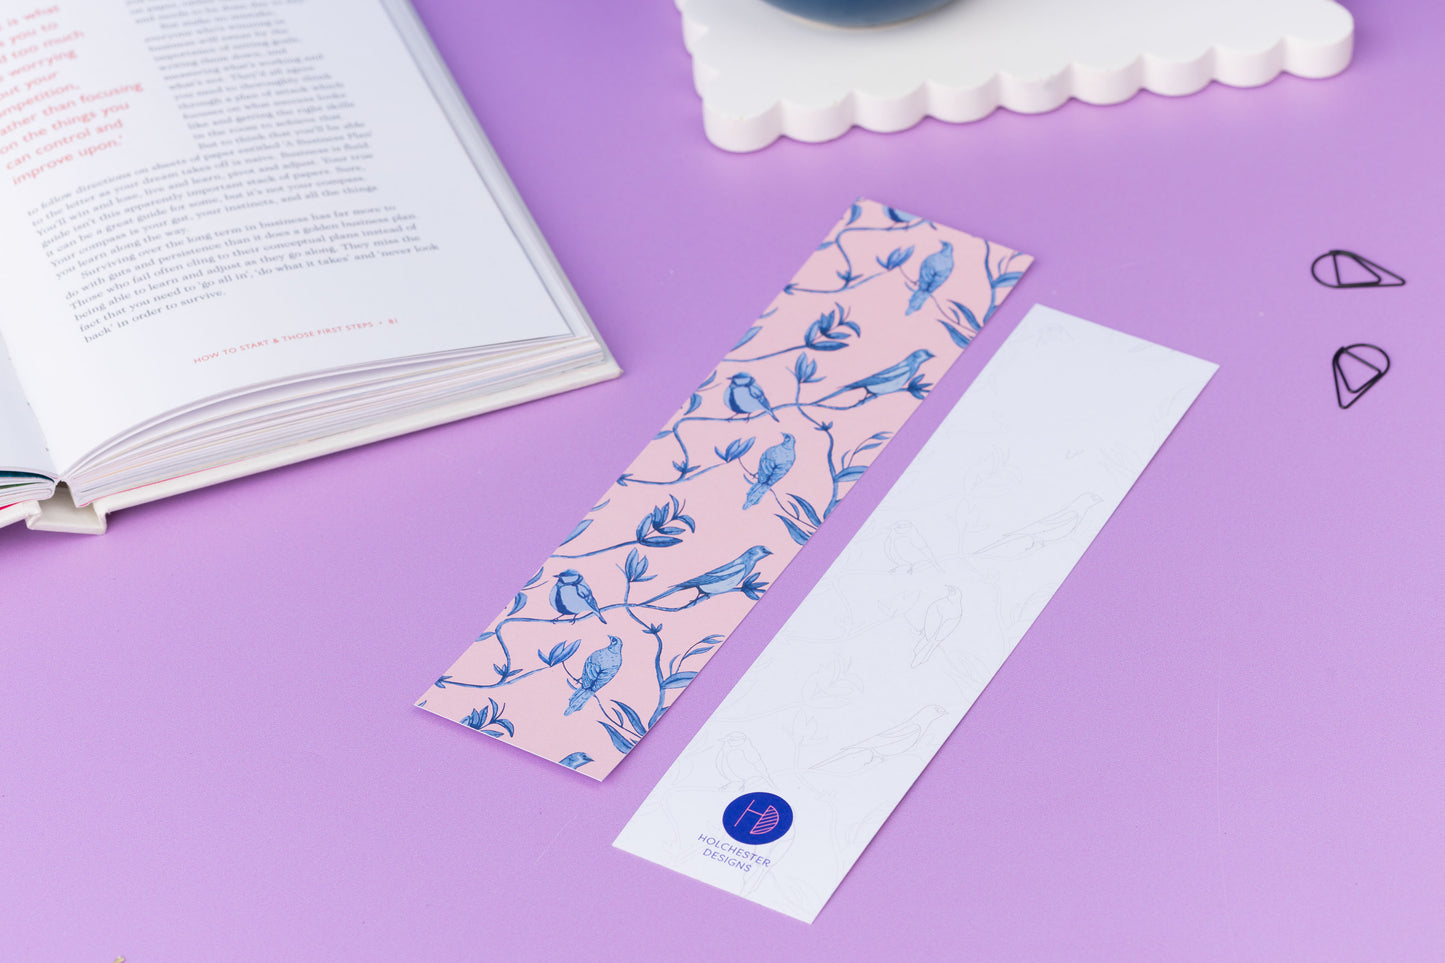 Two of the Brighton Birds double-sided bookmarks, on a lilac desk with a book open to the top left corner.  One side features the full-colour patterned side of the Brighton Birds pattern with the blush pink background and shades of blue branch, leaf and bird hand-painted motifs.  The other side is the light-grey line drawing.  